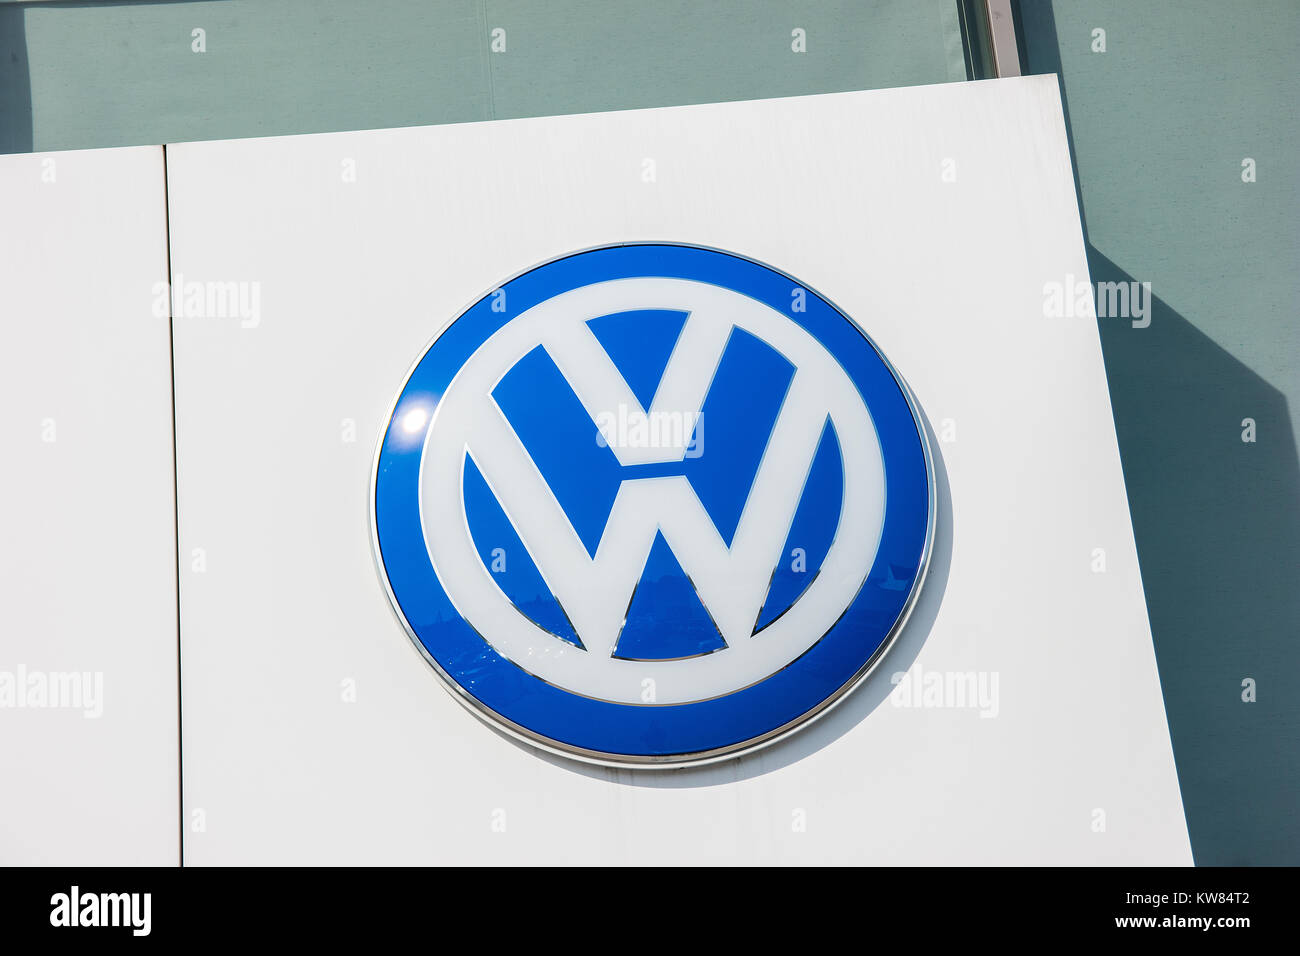 Volkswagen VW sign on a store facade. Volkswagen is a famous European car manufacturer company based on Germany. Stock Photo